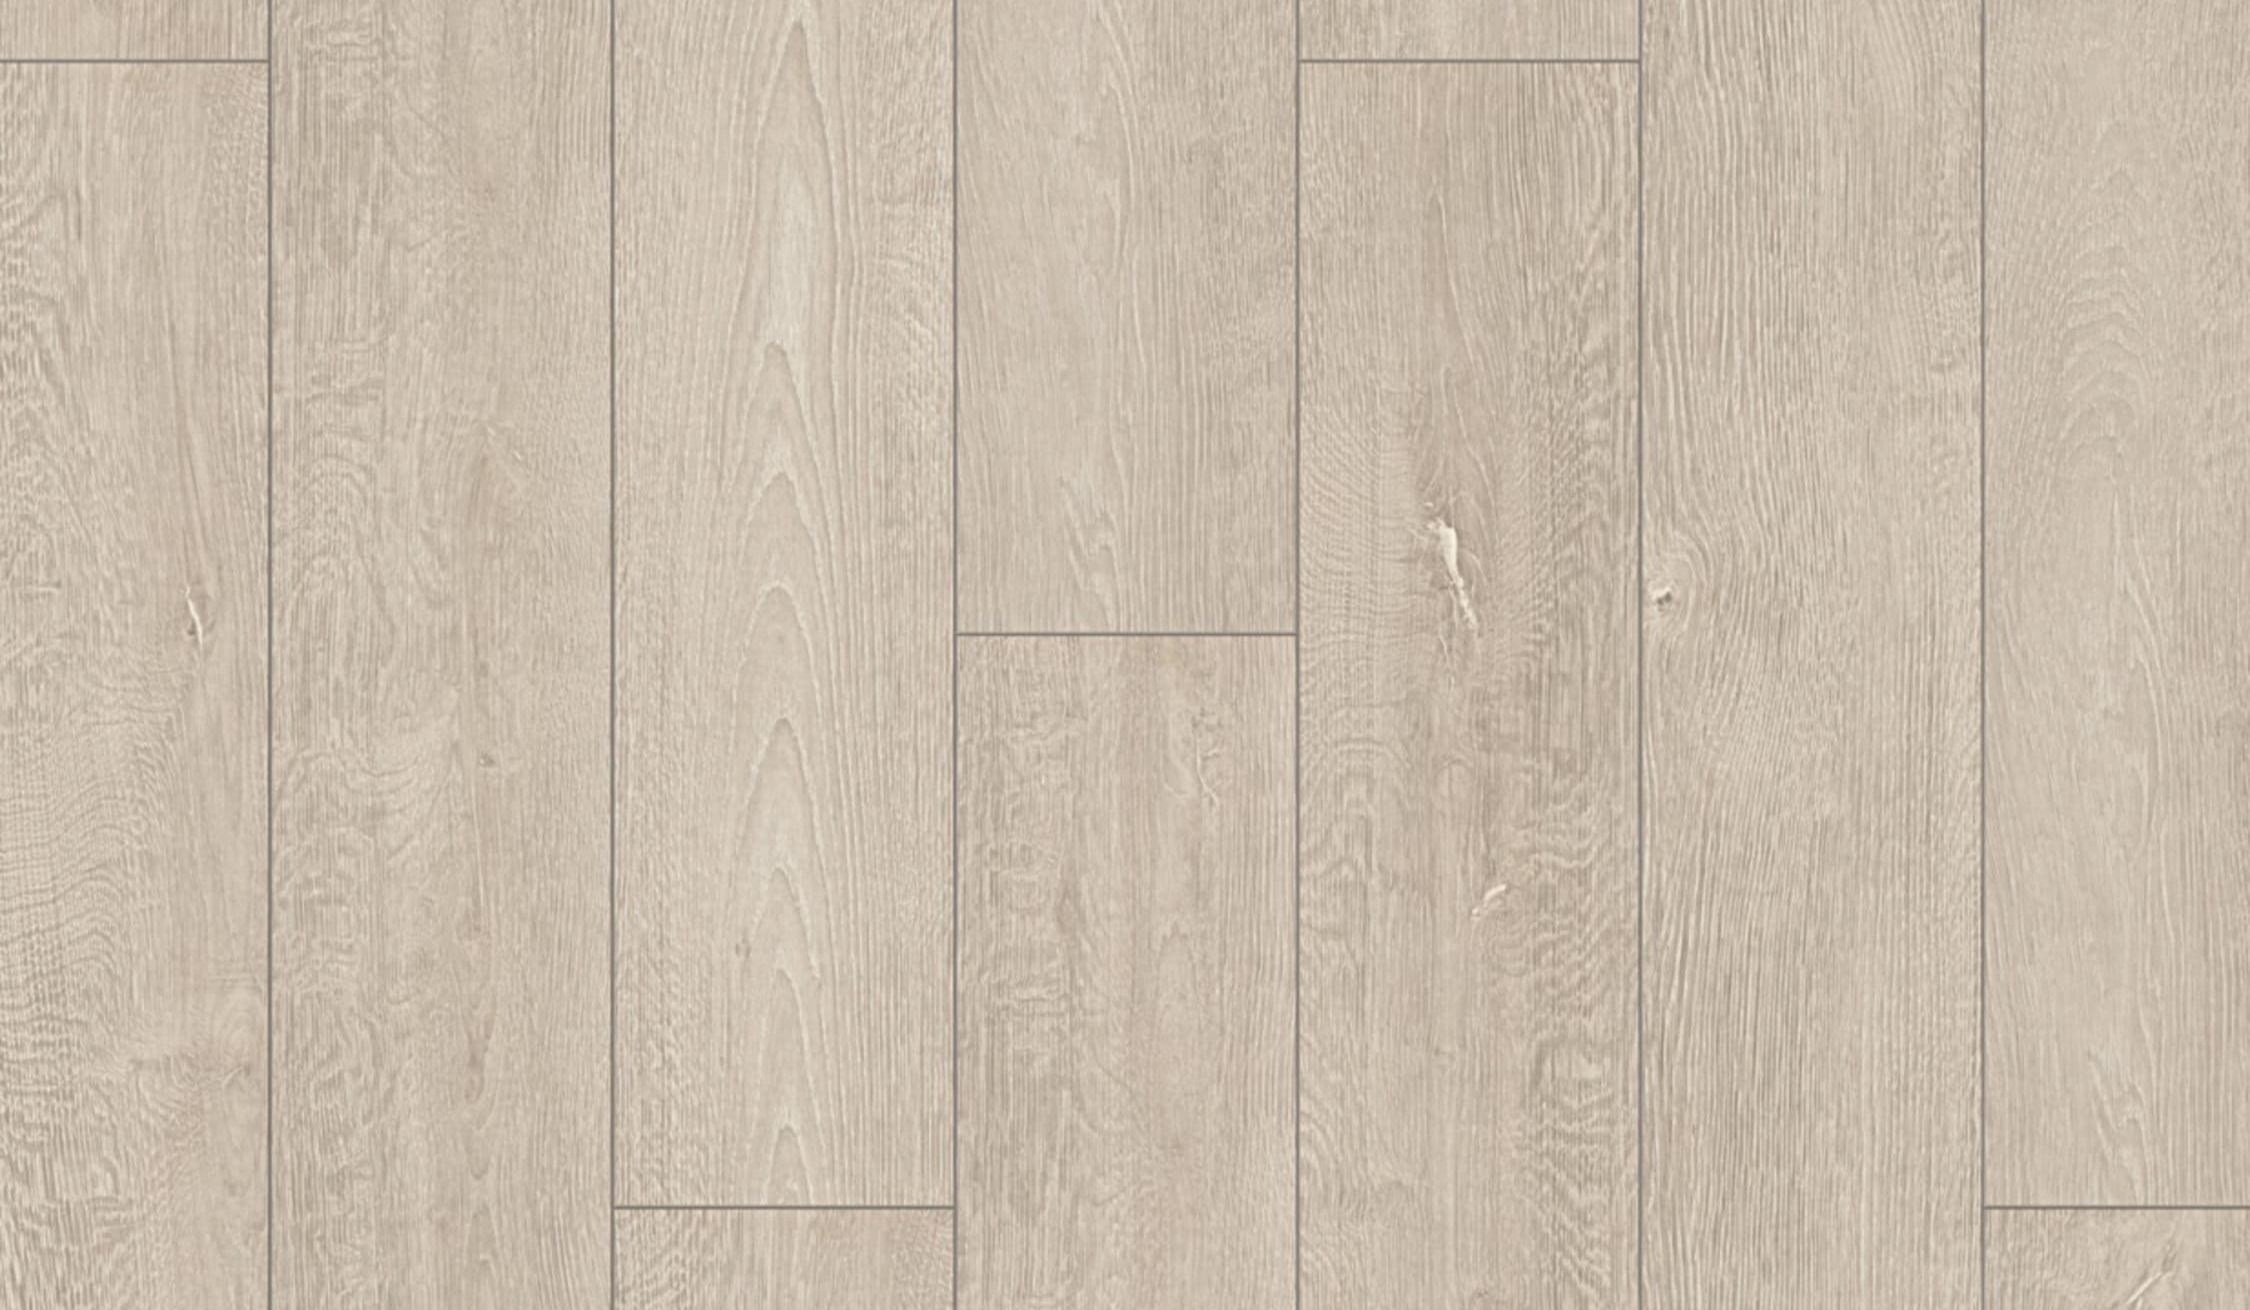 What to Know About White Oak Flooring Before You Buy